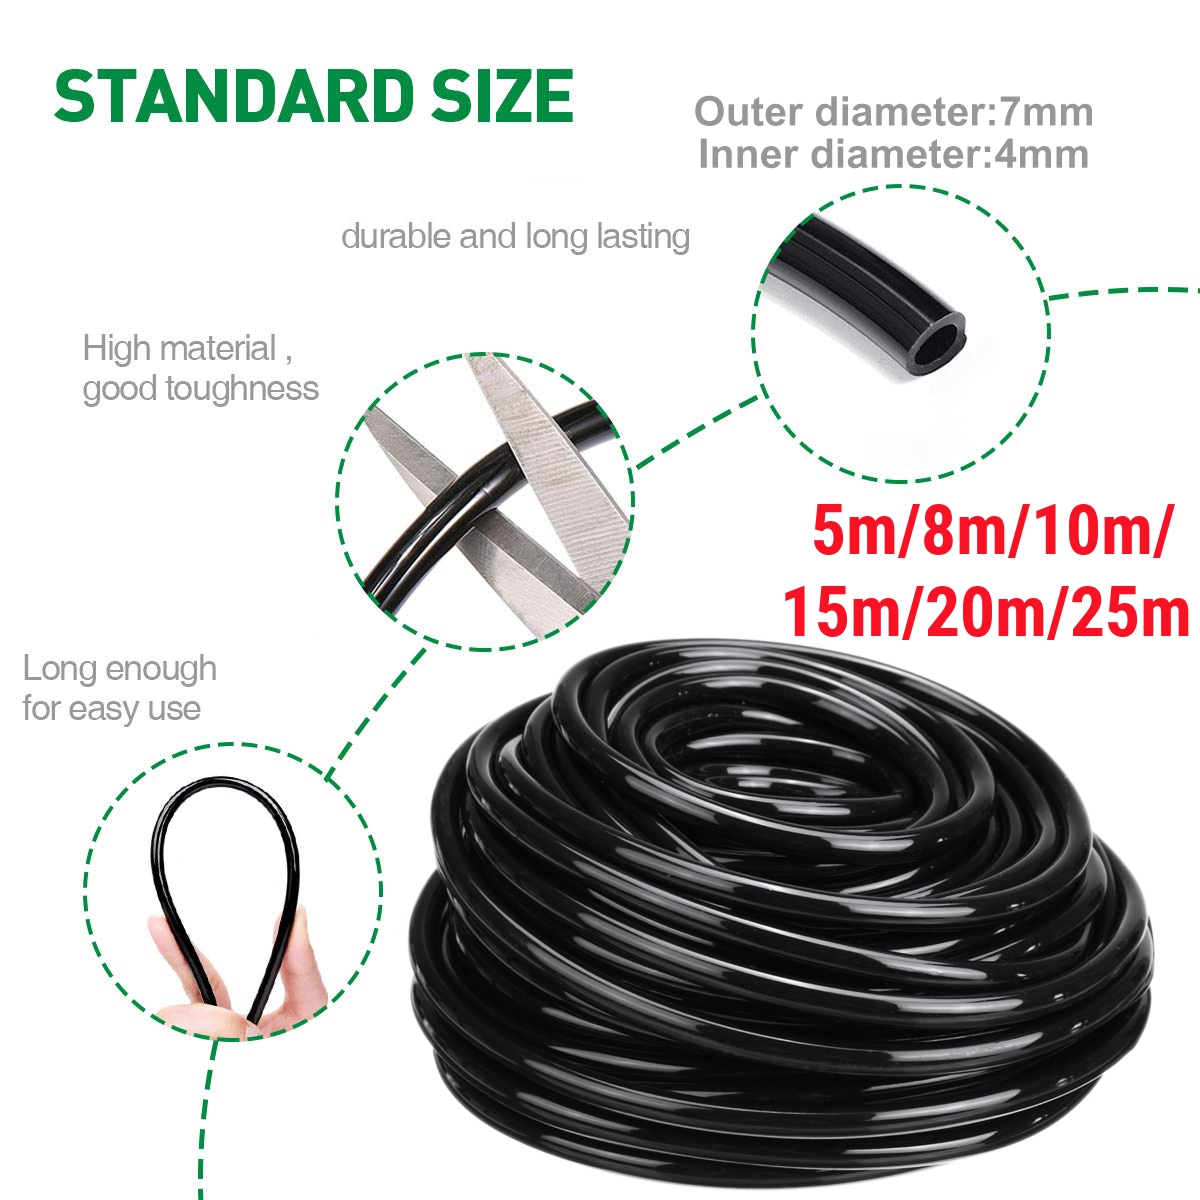 Adjustable-Water-Misting-Cooling-Irrigation-System-Kit-Tubing-Hose-5M8M10M15M20M25M-with-Mist-Nozzle-1687301-4